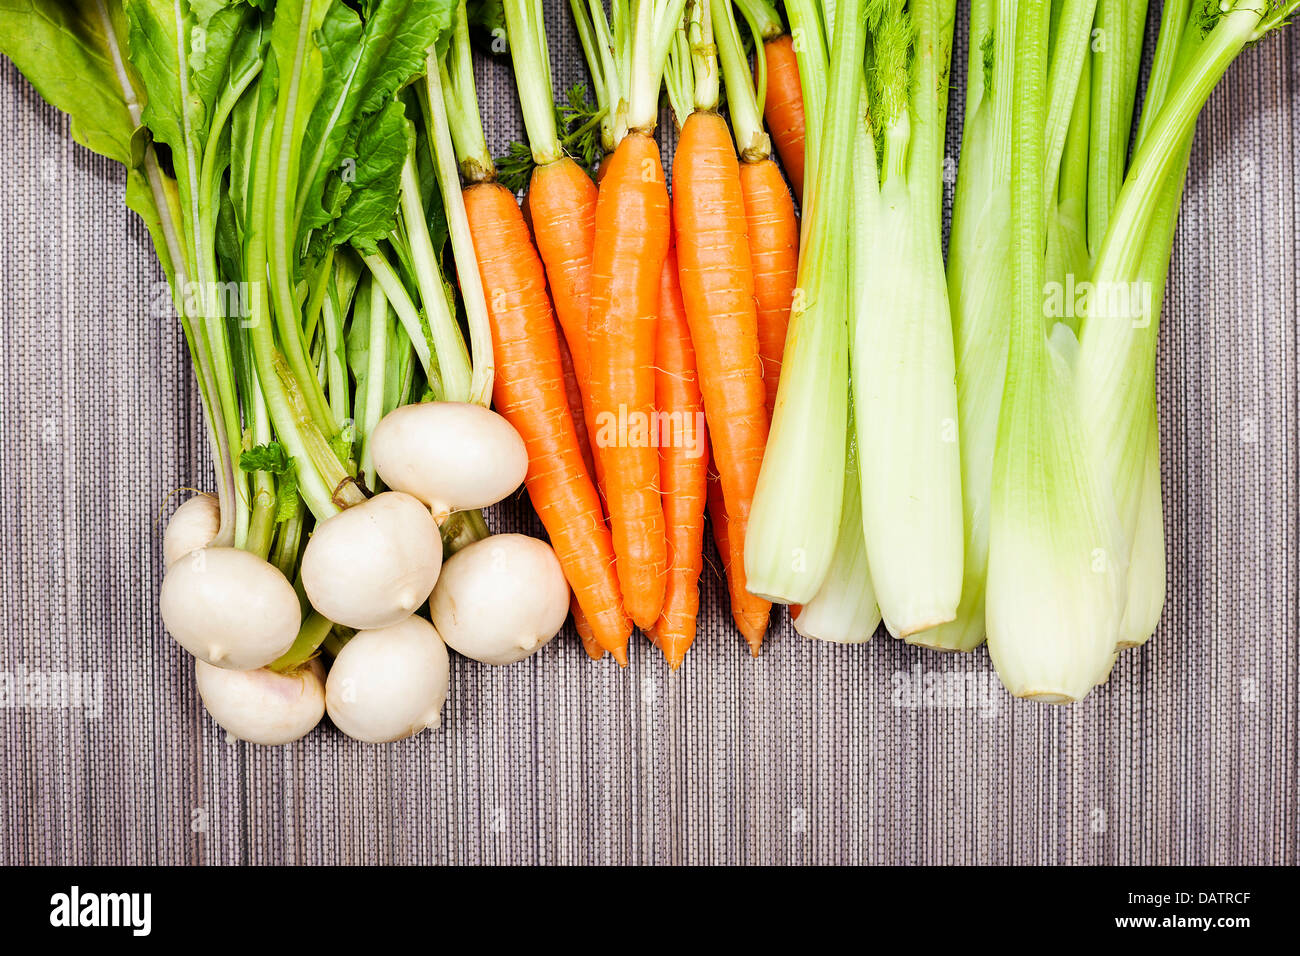 Turnip, carrot and celery from garden Stock Photo